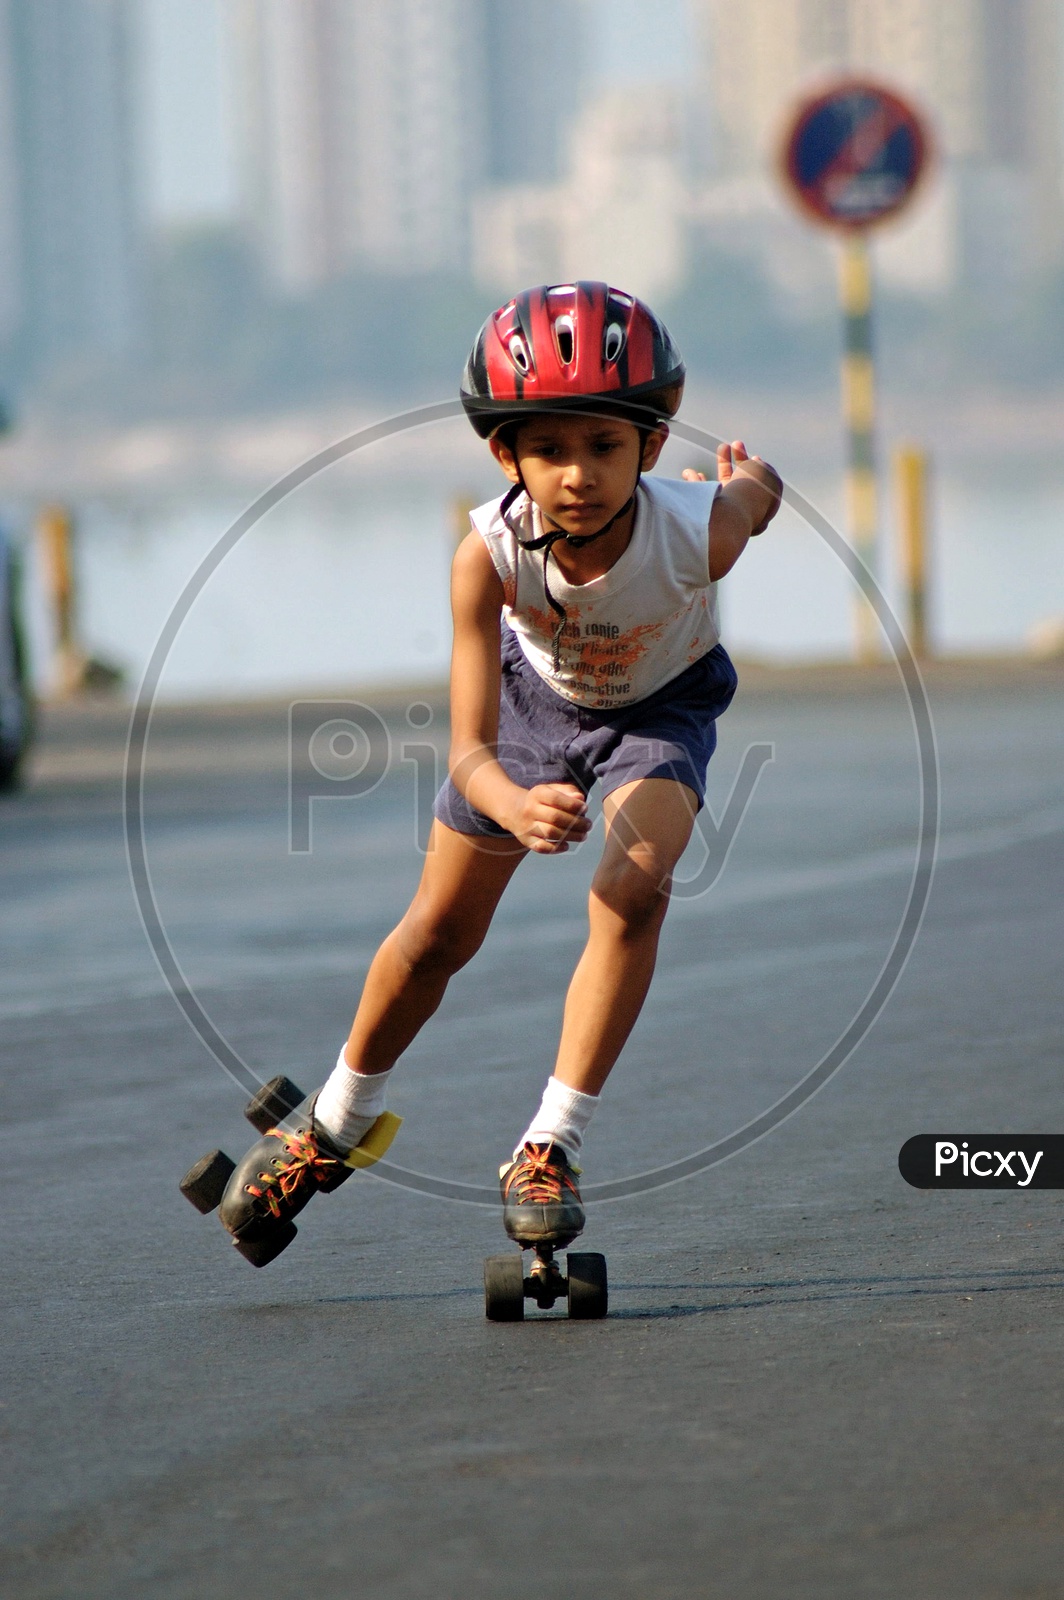 A boy skating with a helmet on the road